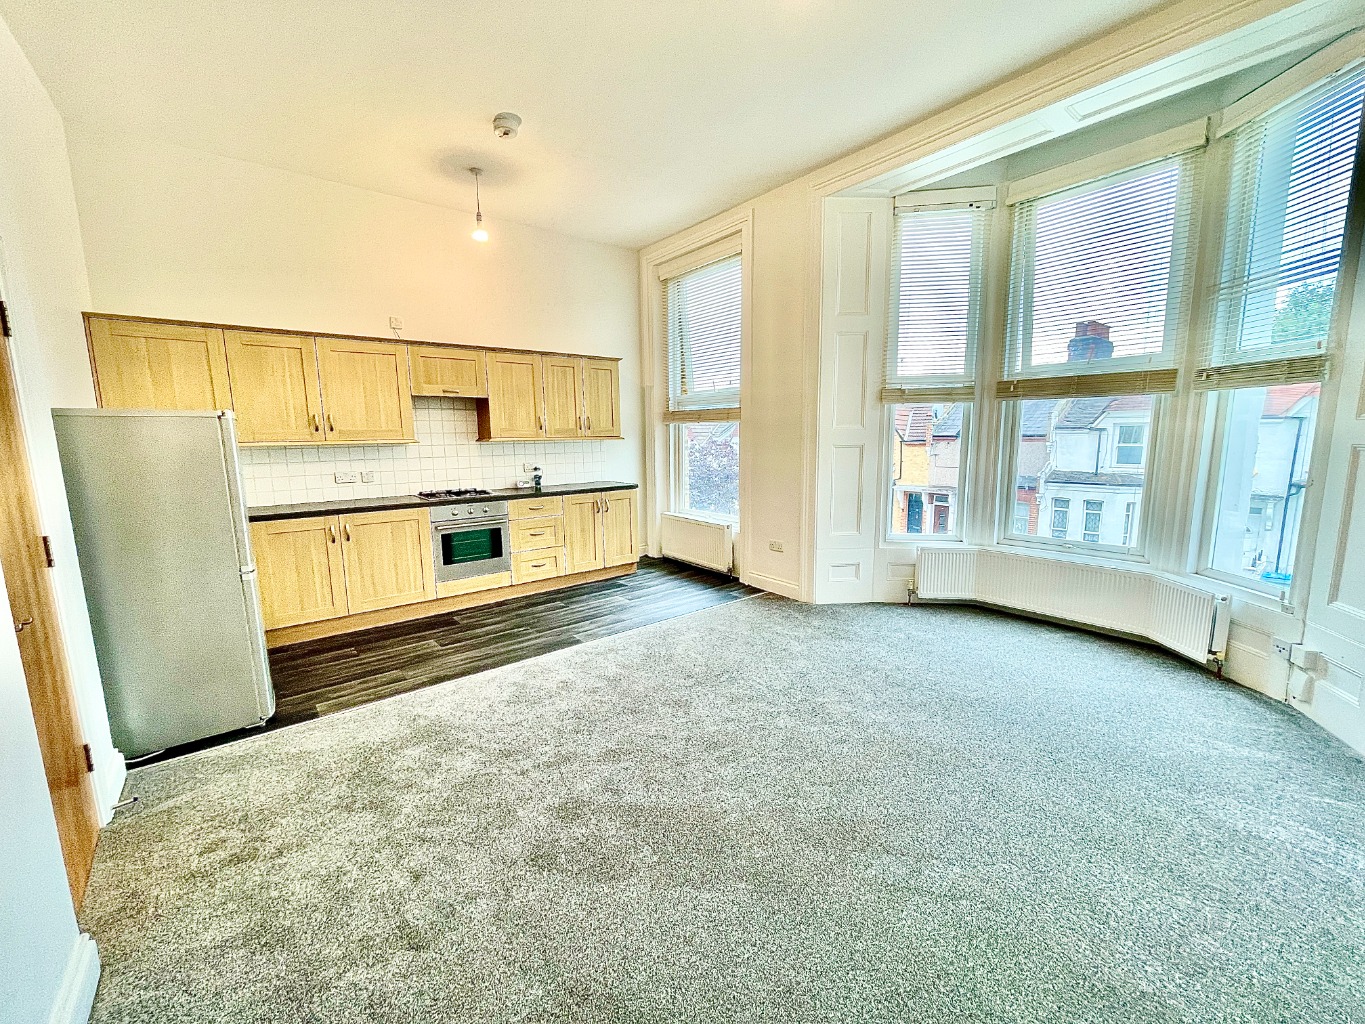 We hold keys for this stunning first floor Victorian unfurnished flat for rent. Call us now to arrange your viewing.